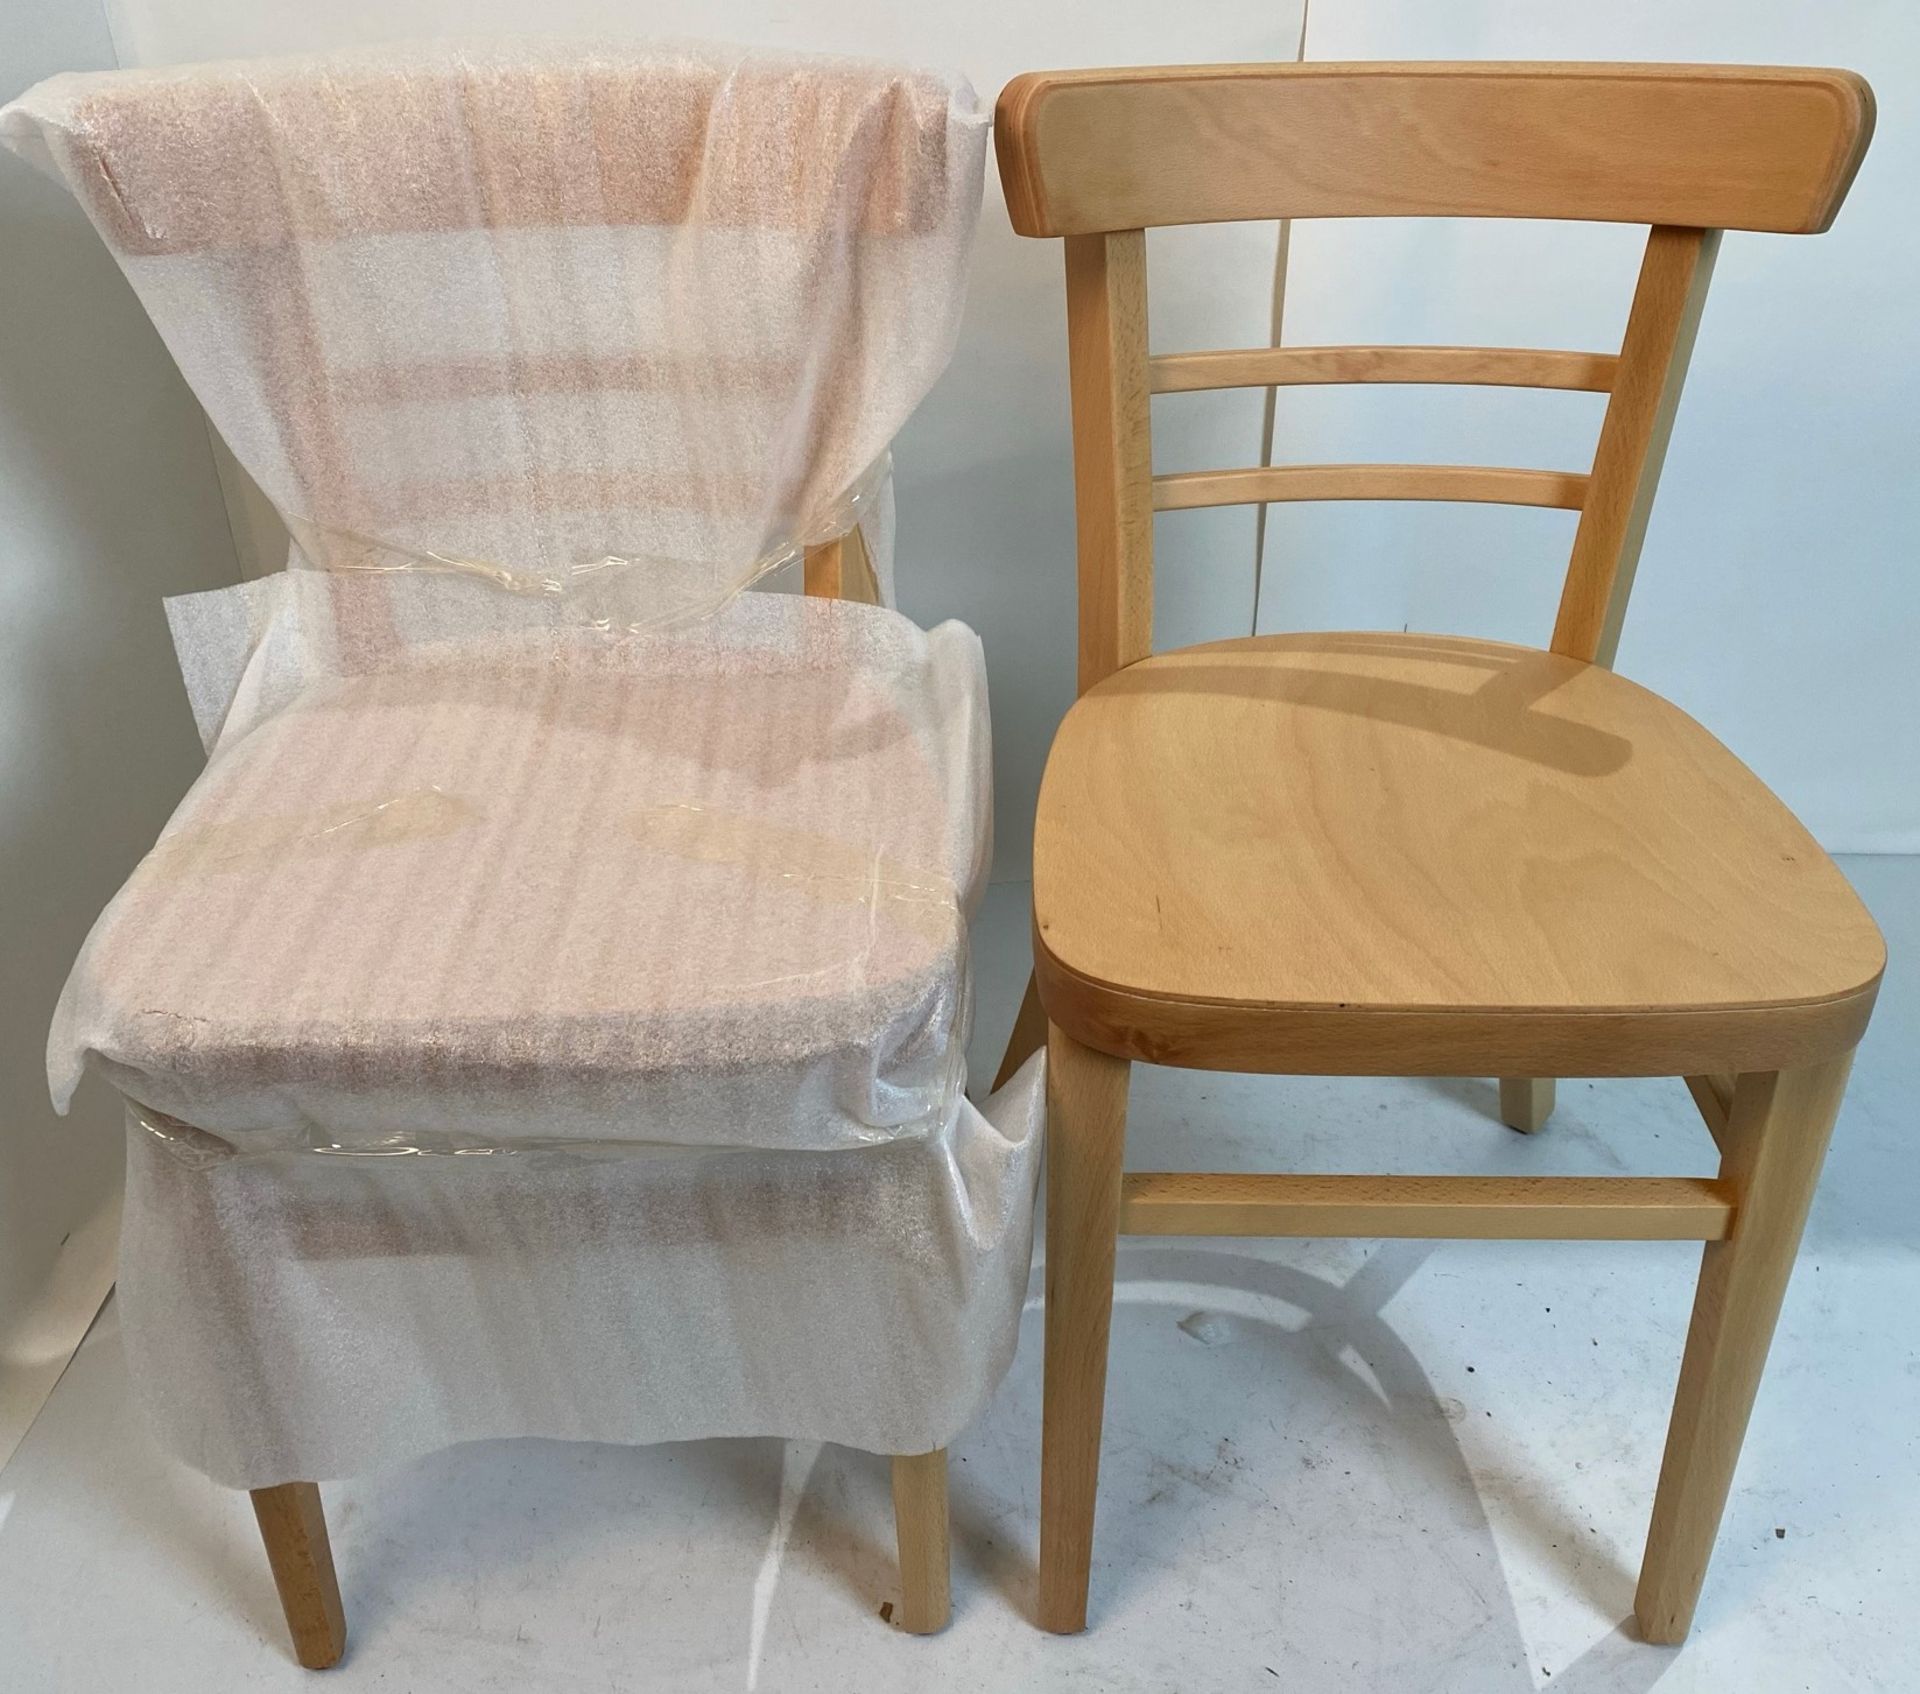 2 x Expresso Natural wood finish chairs with plastic gliders - Image 2 of 4